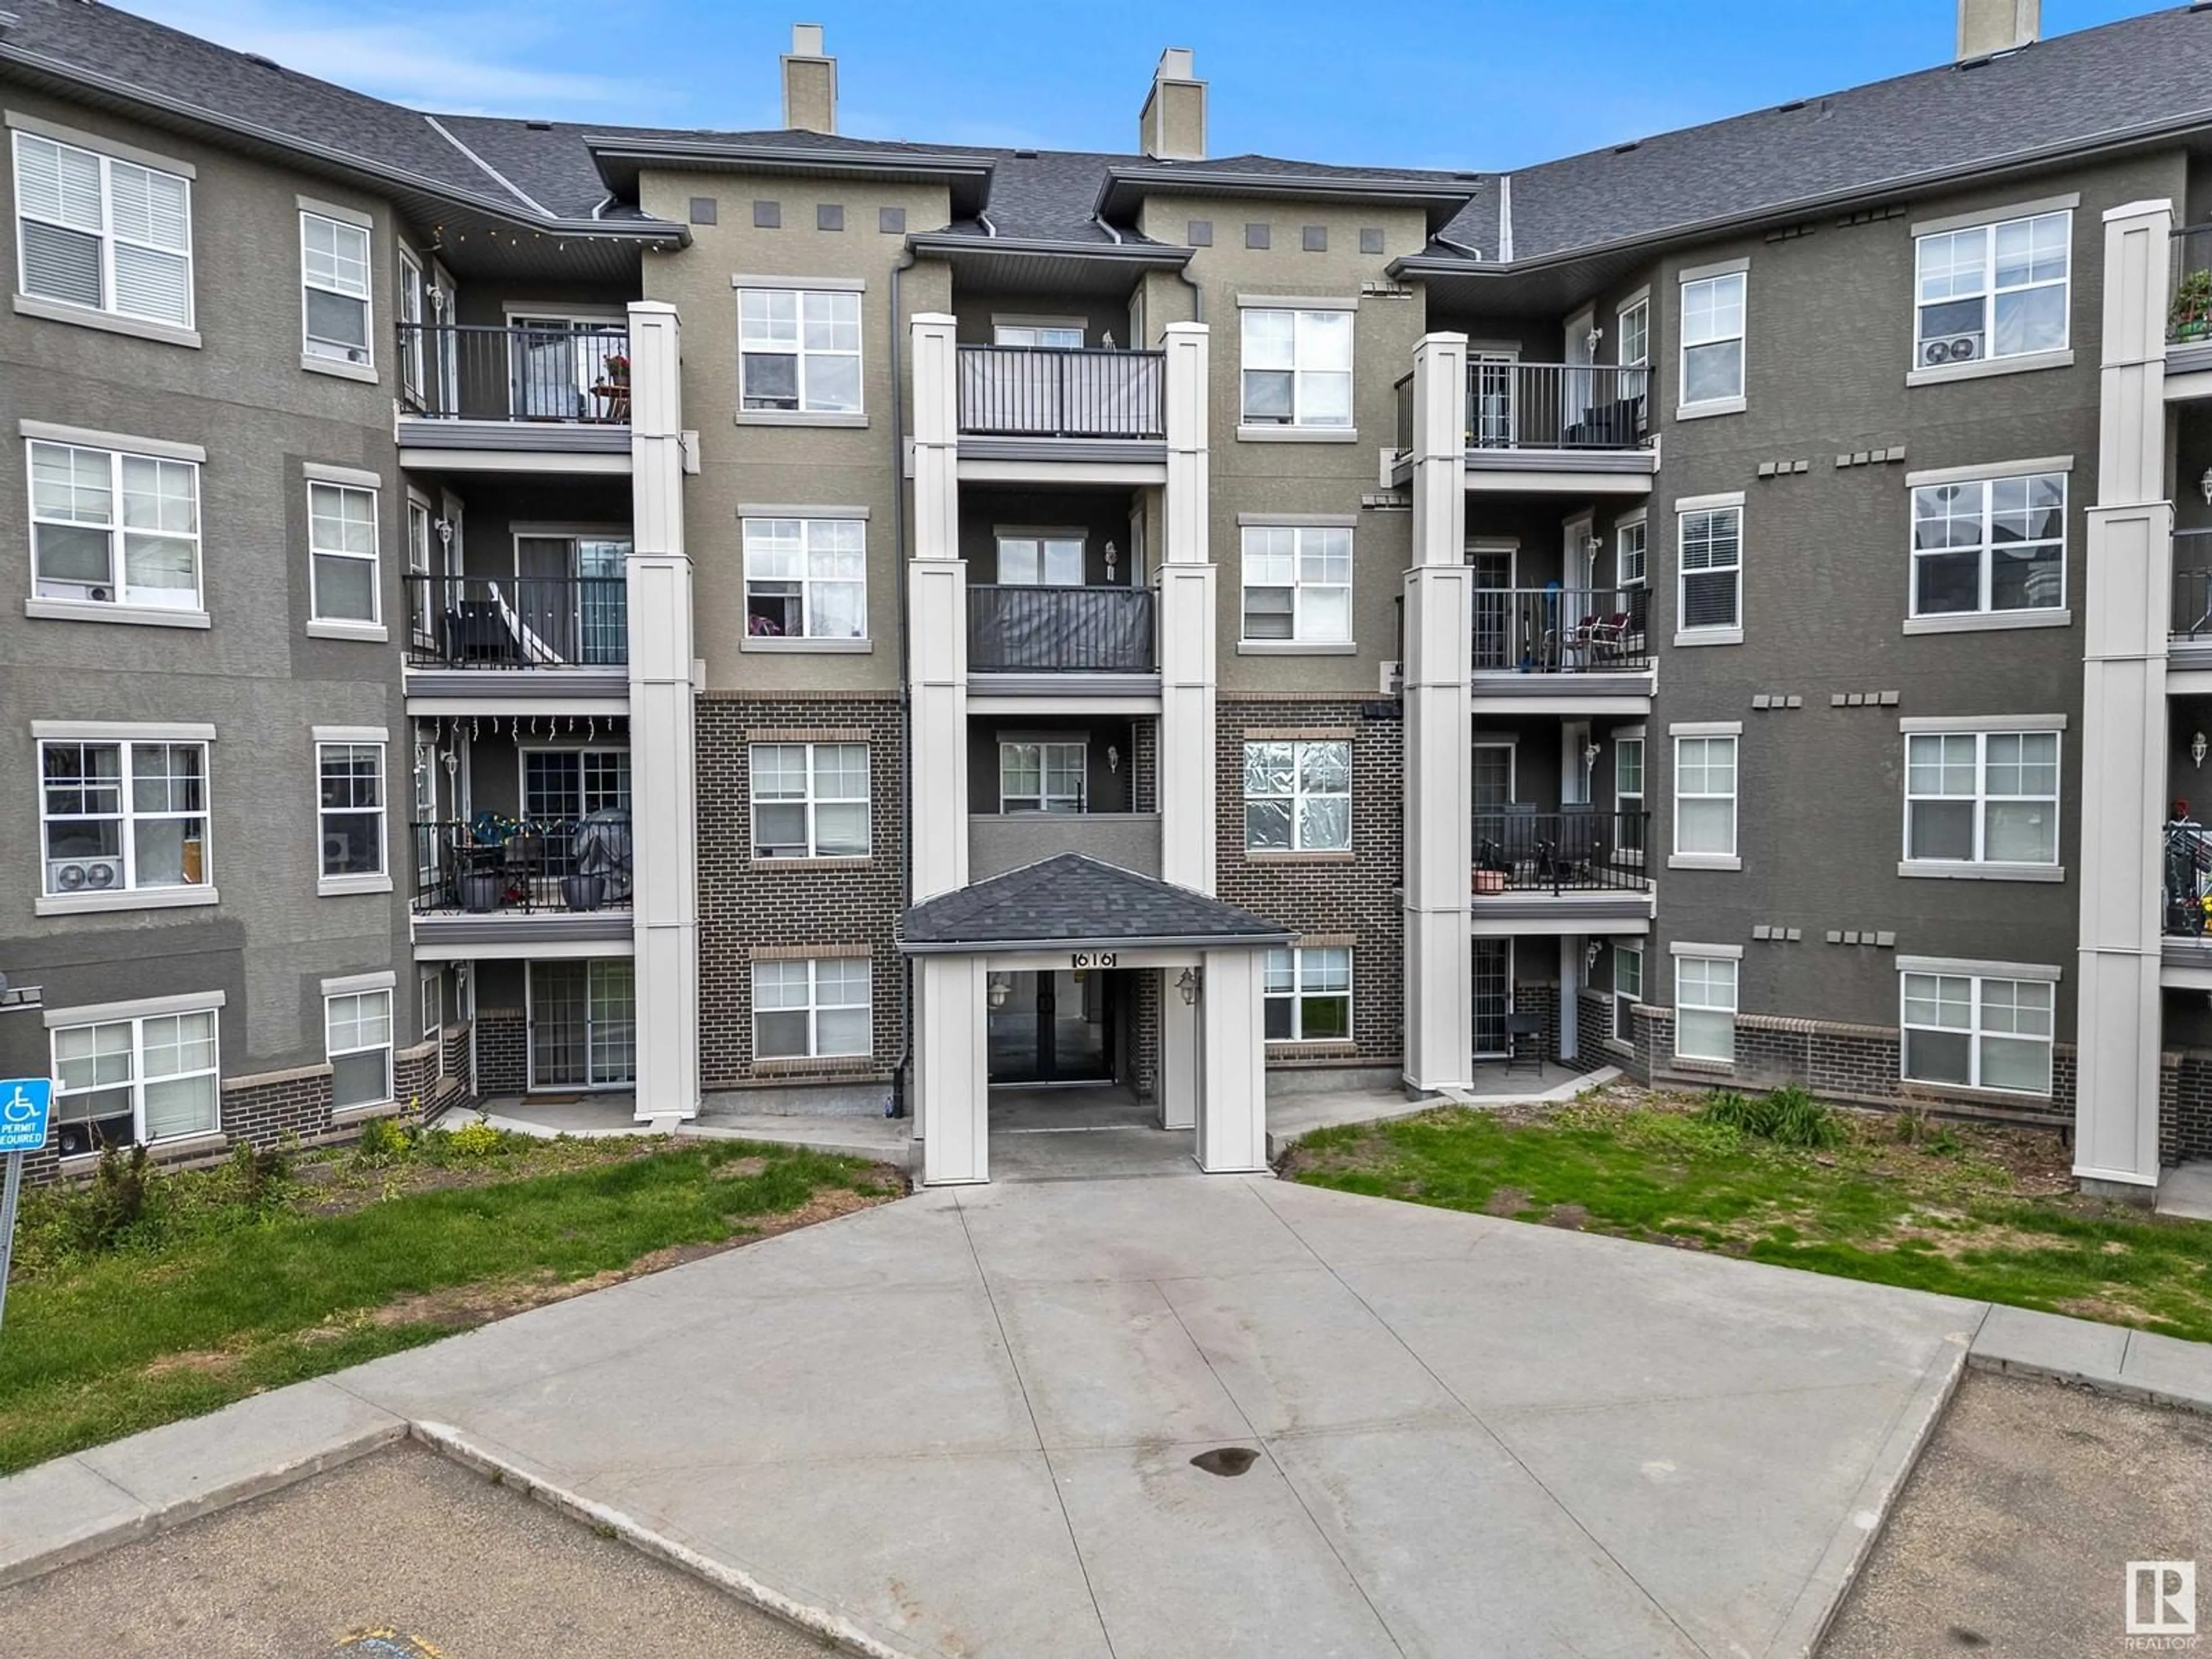 A pic from exterior of the house or condo for #203 622 MCALLISTER LO SW, Edmonton Alberta T6W1N2